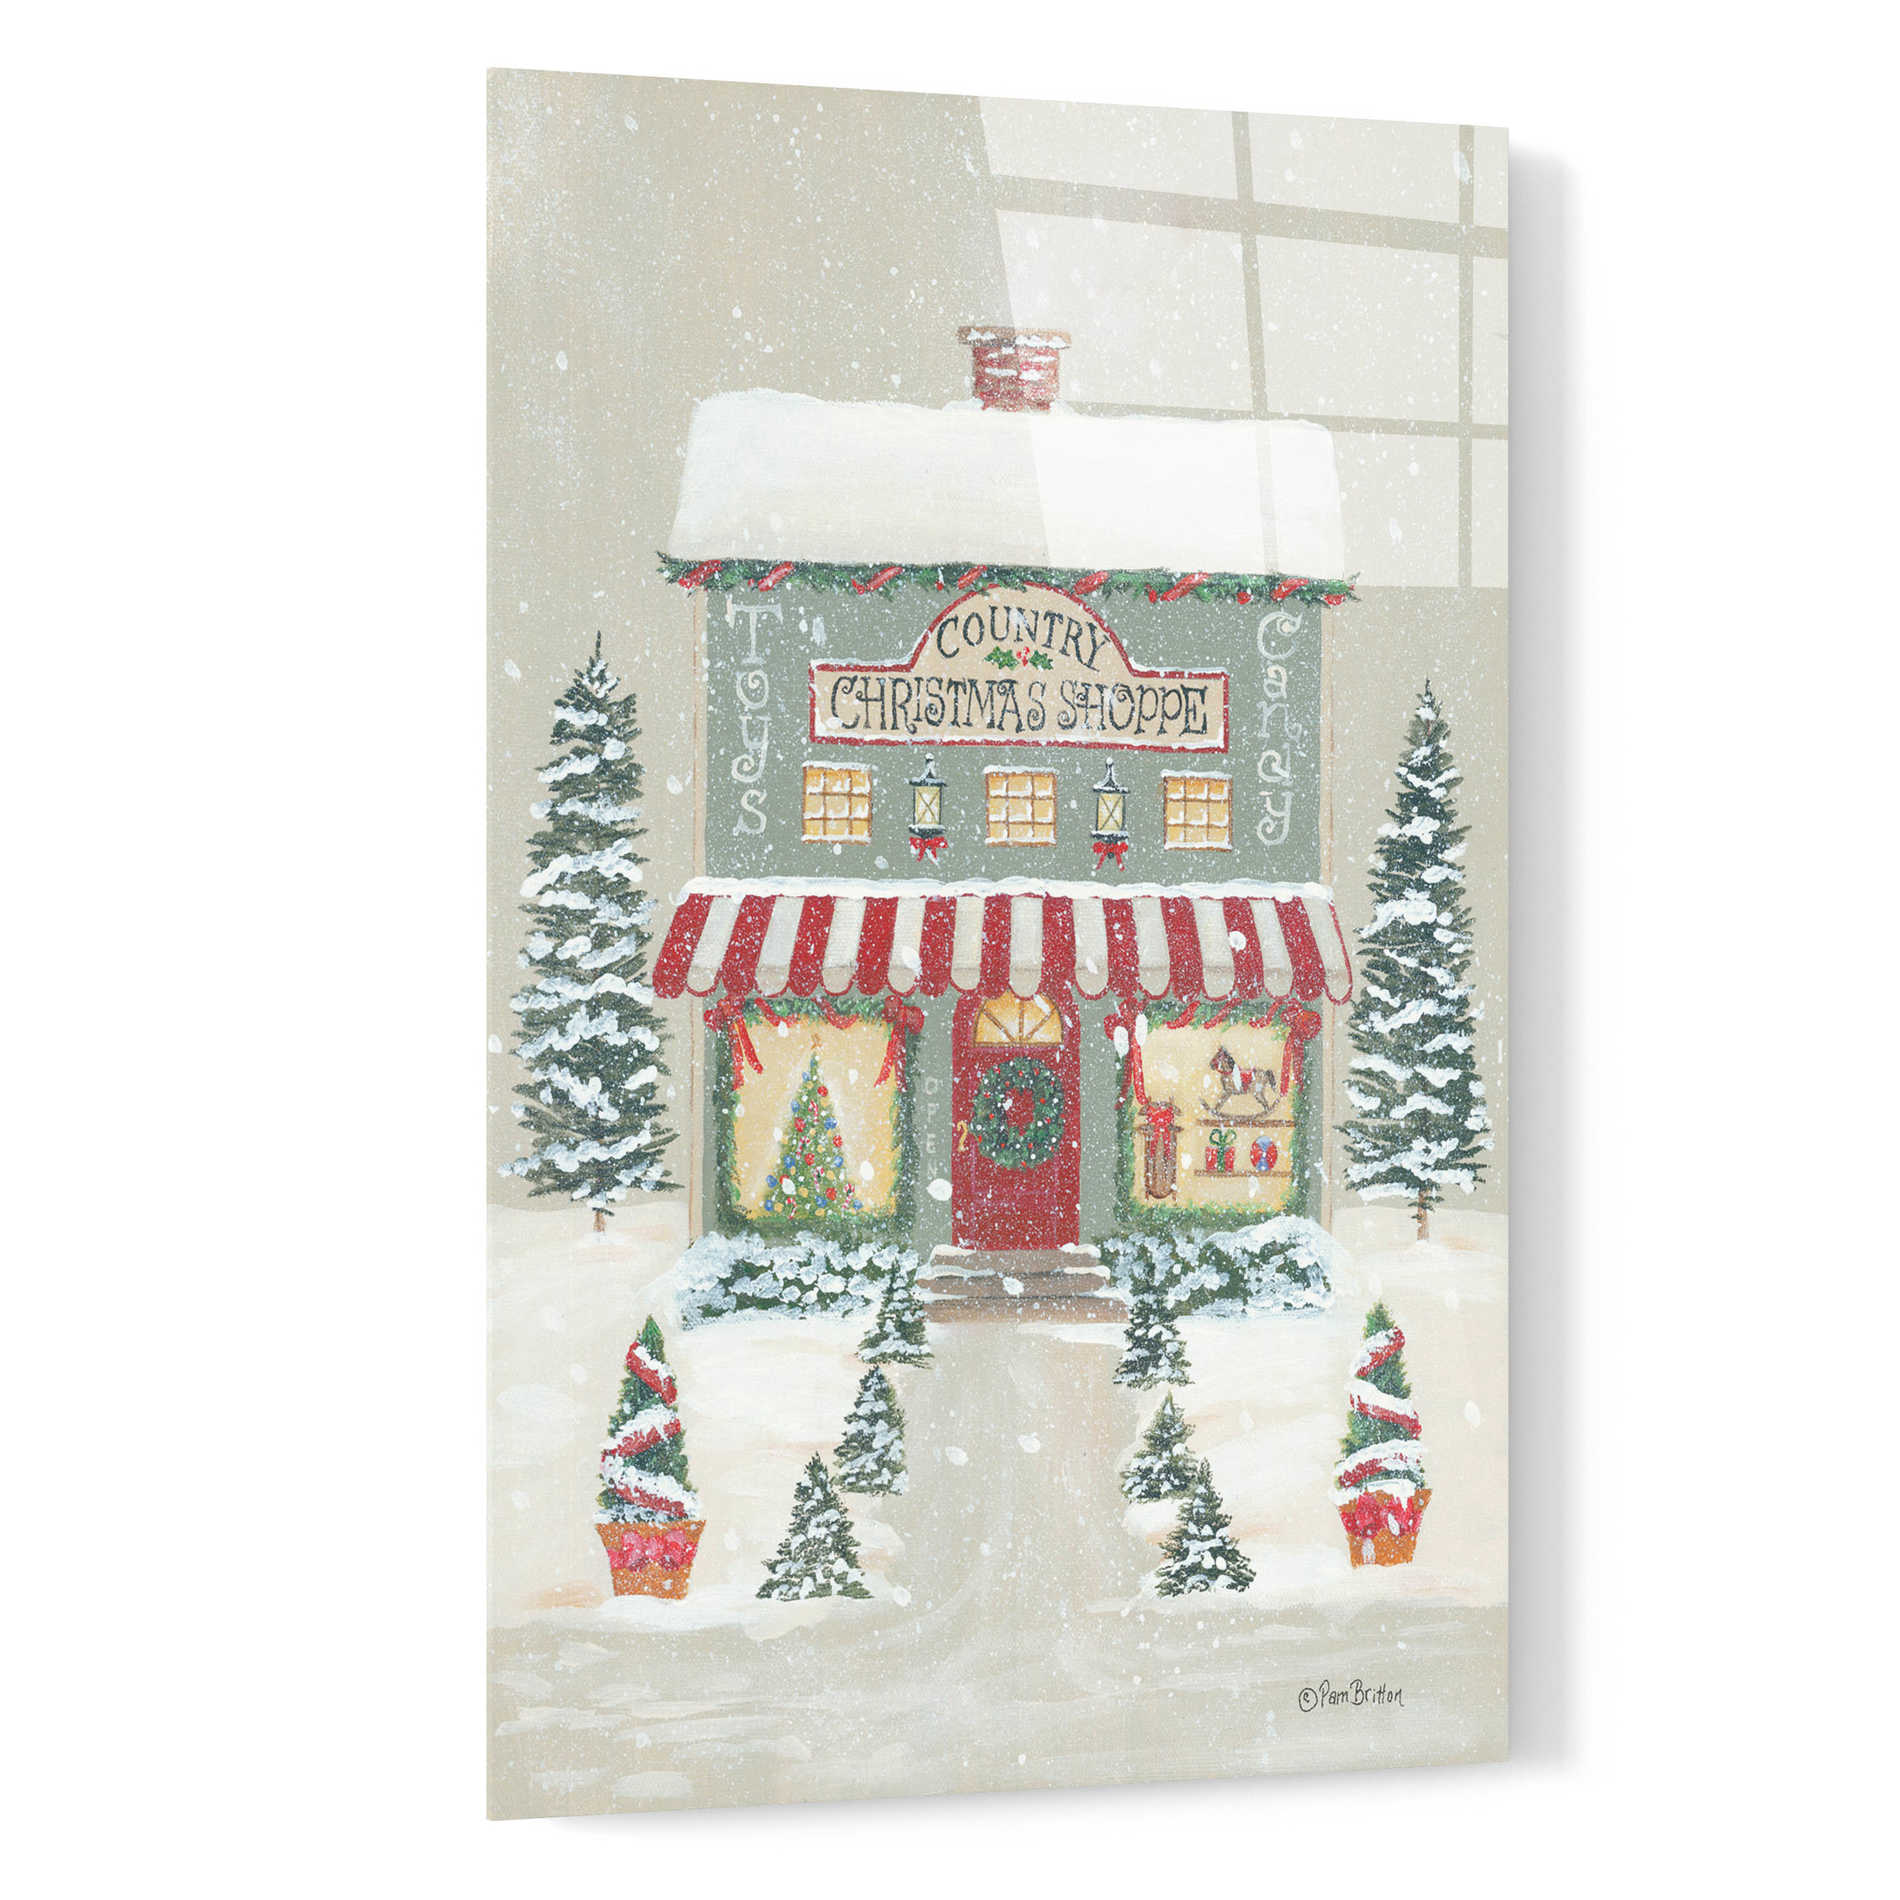 Epic Art 'Country Christmas Shoppe' by Pam Britton, Acrylic Glass Wall Art,16x24